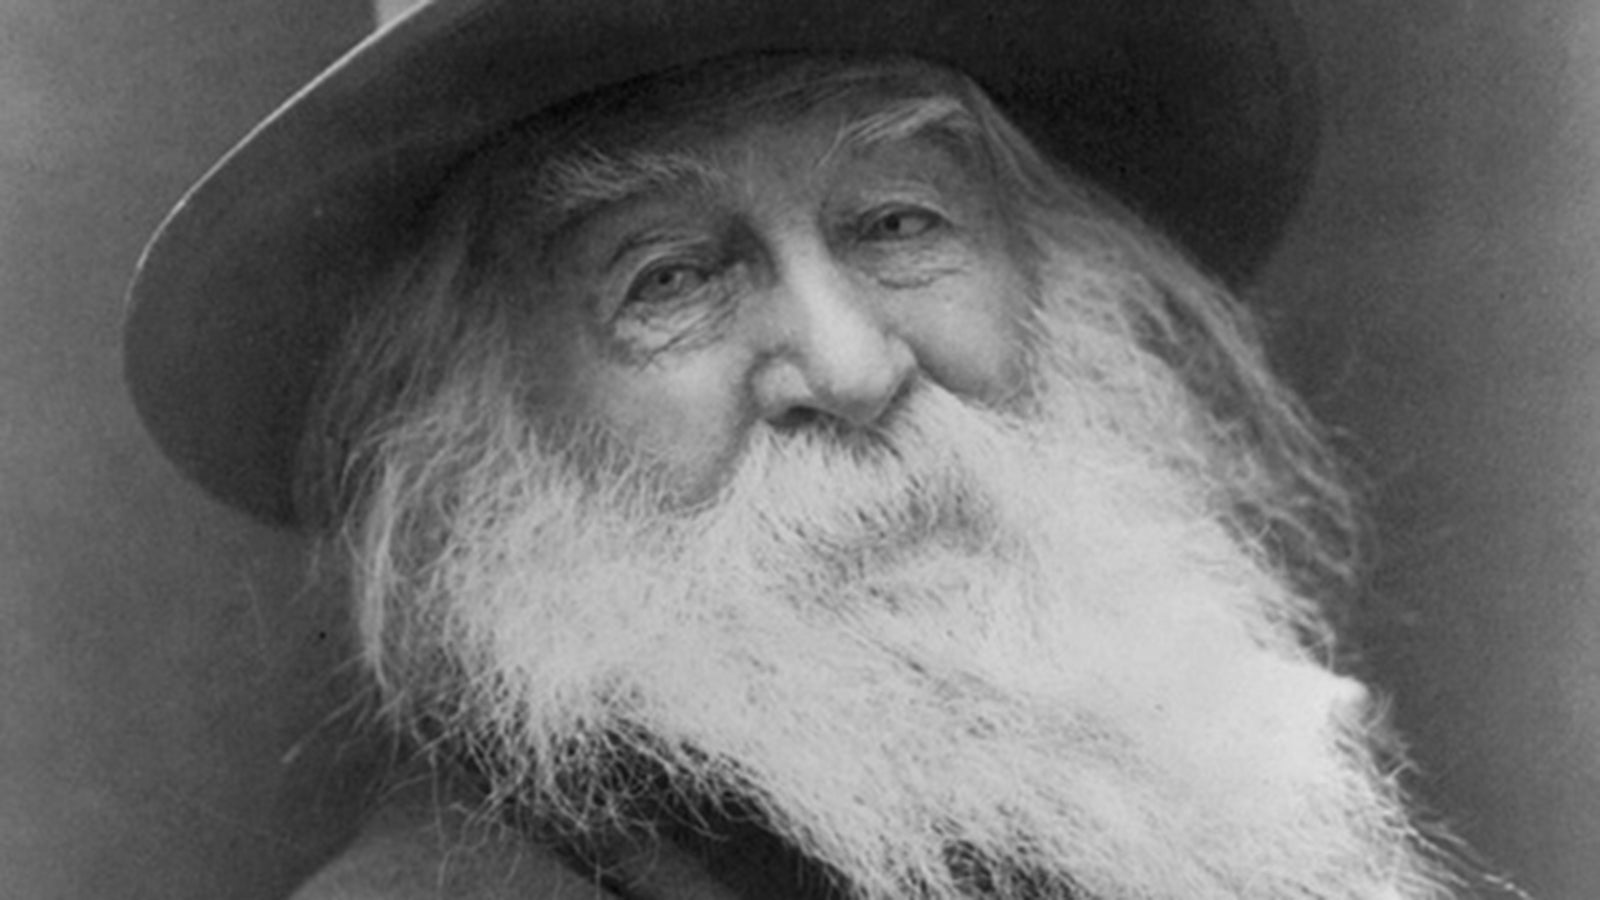 A close up black and white photograph of an elderly Walt Whitman, with a long white beard, wearing a dark wide-brimmed hat